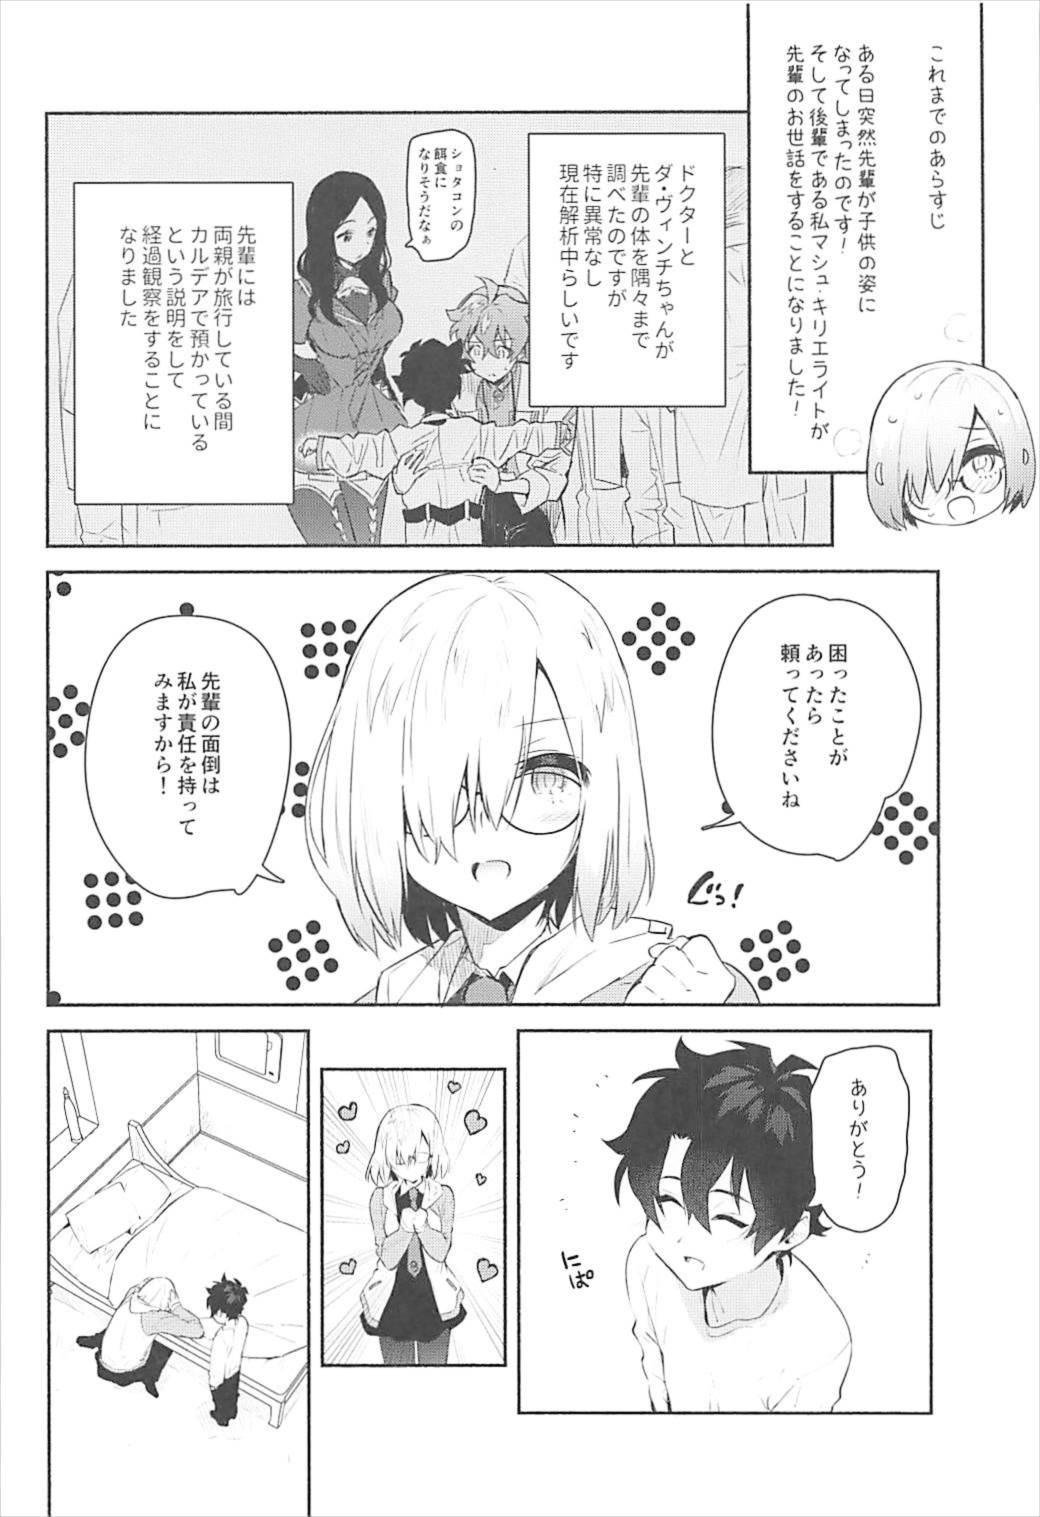 Interracial Mash to Issho - Fate grand order Assfuck - Page 5